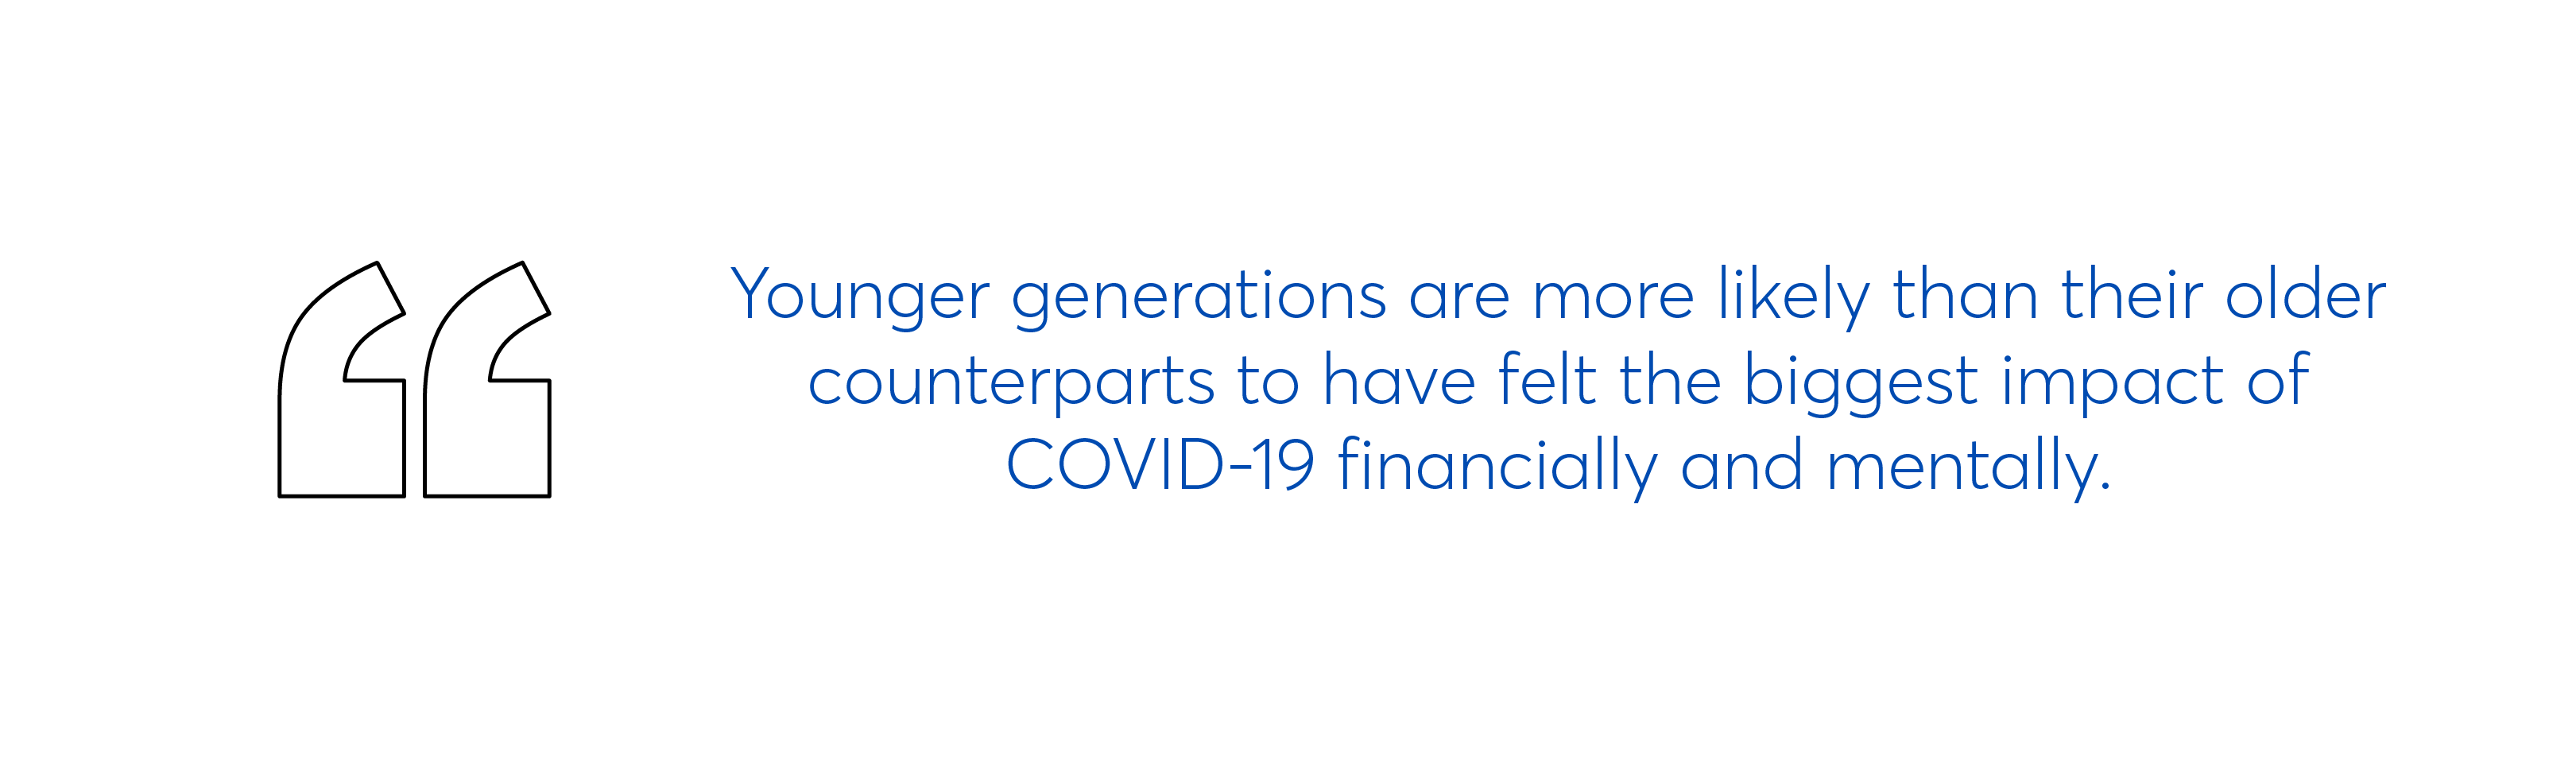 Younger generations are more likely to feel financial pressure